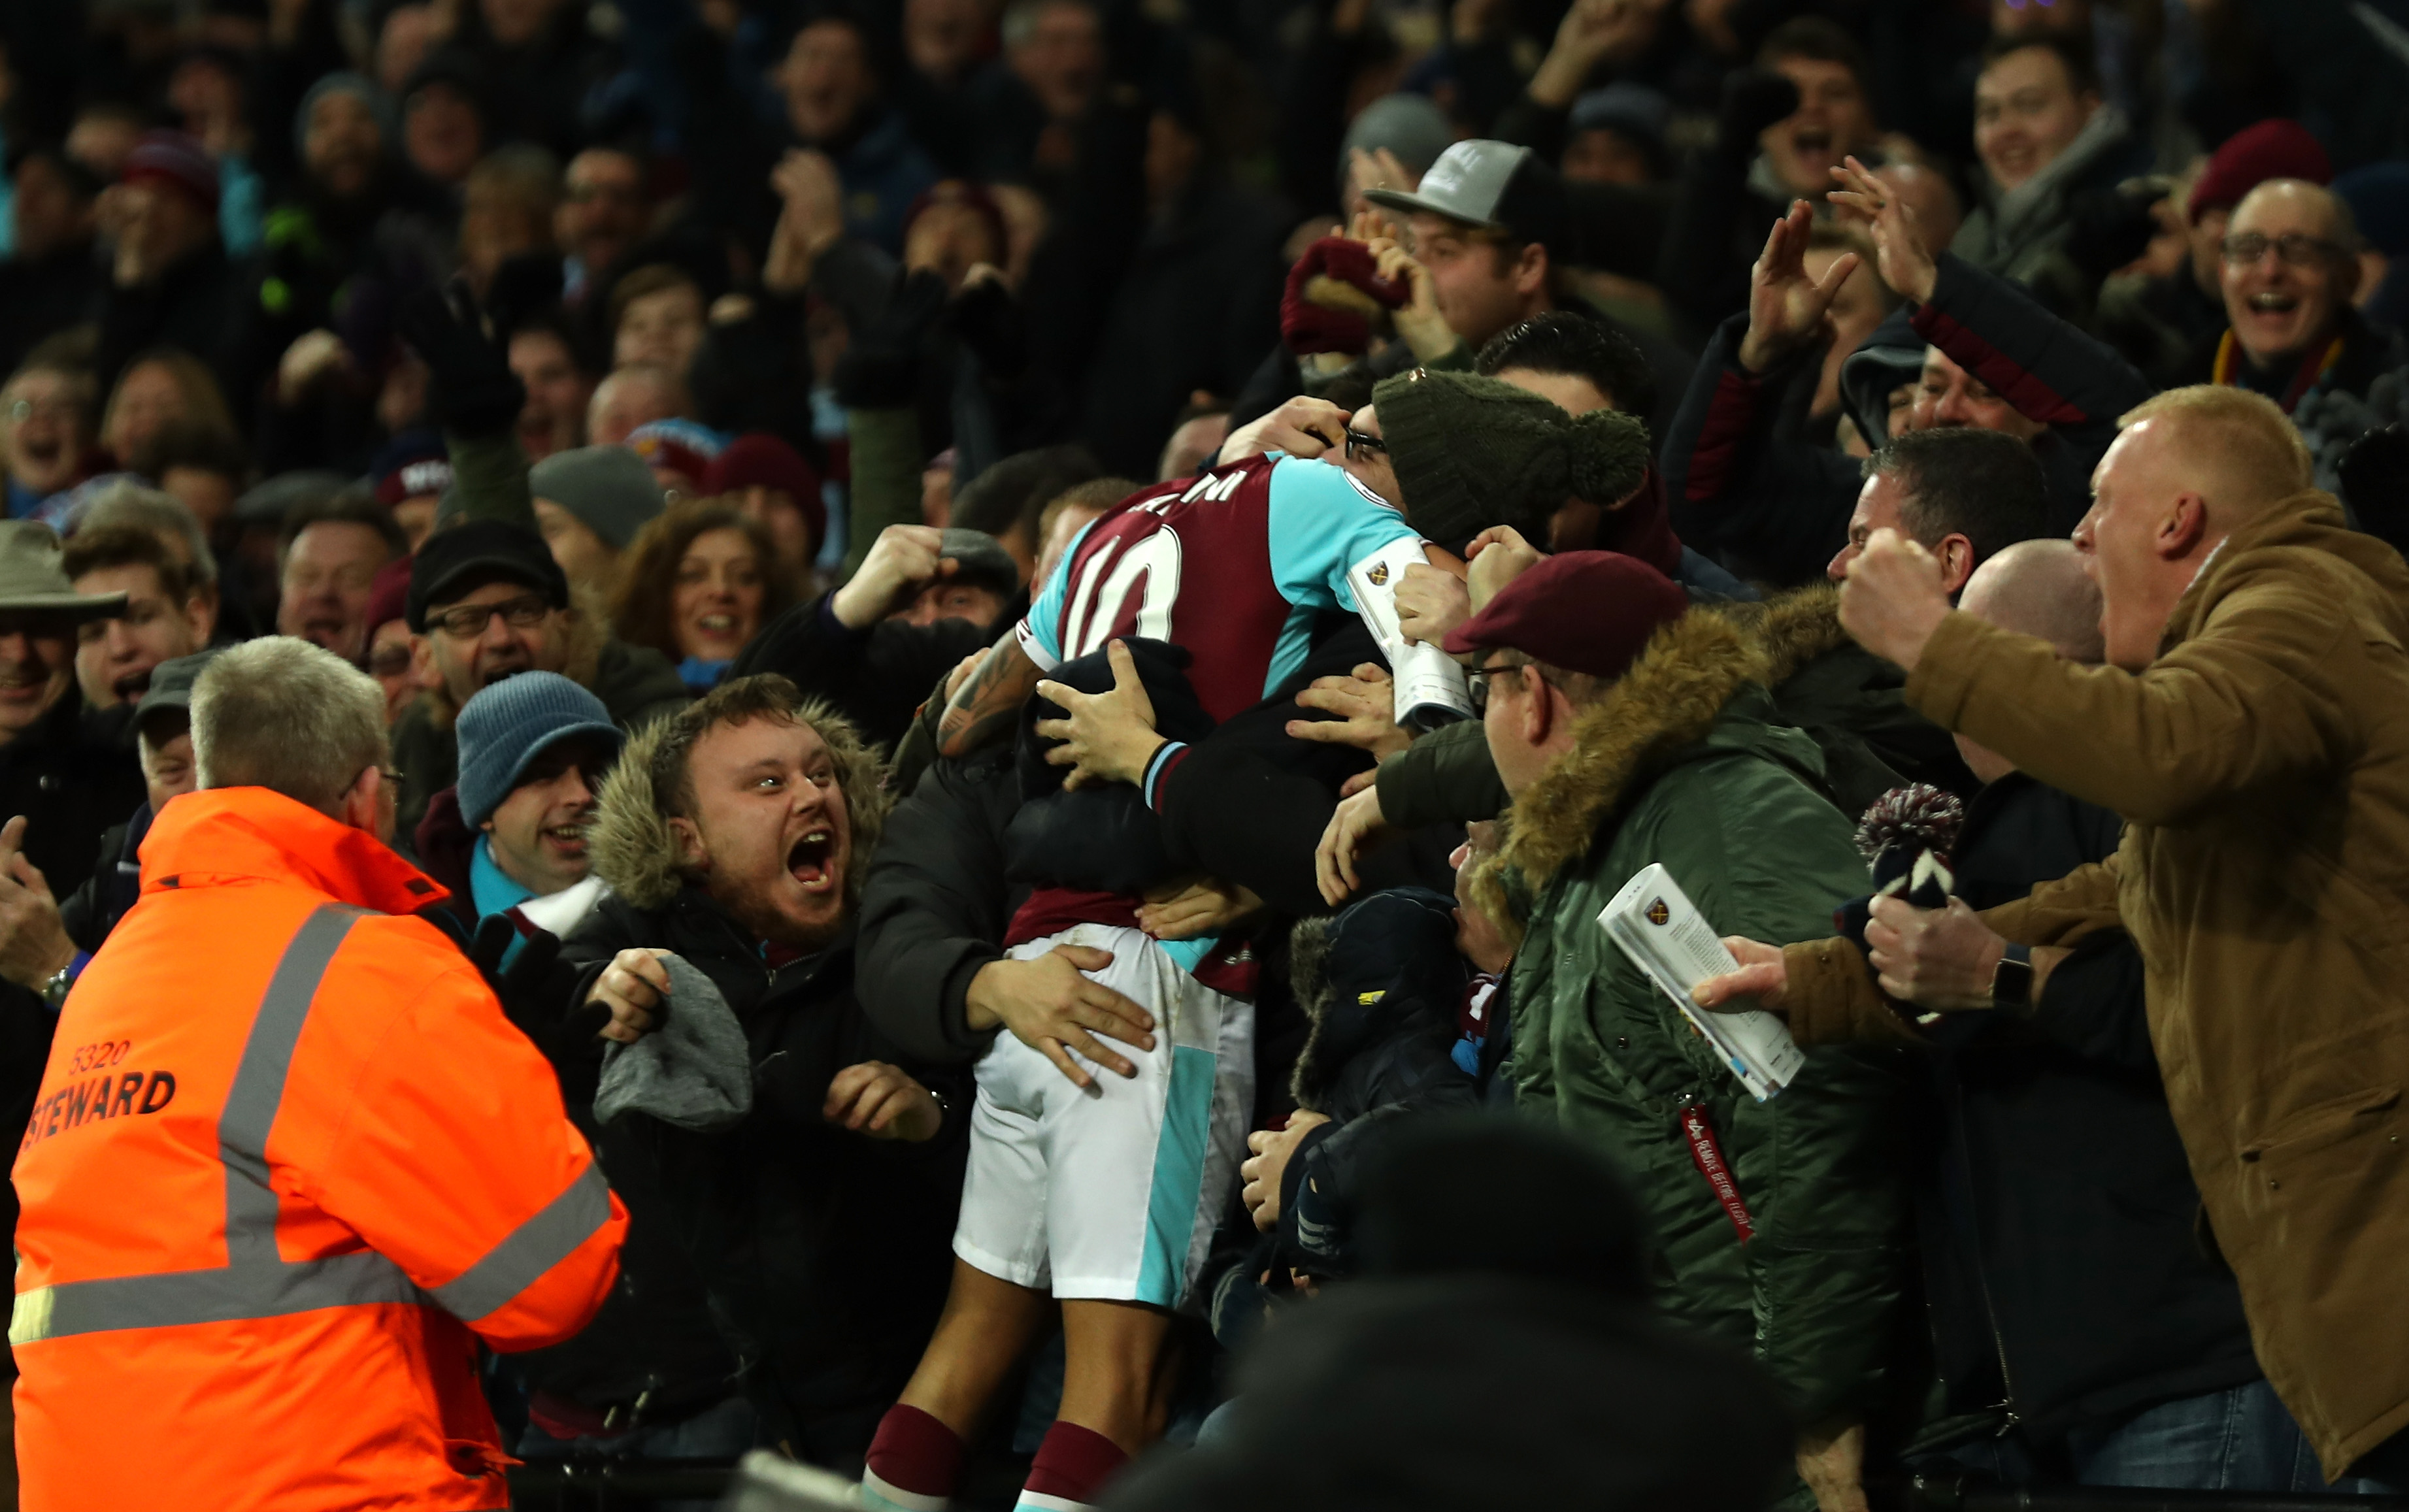 LONDON, ENGLAND - JANUARY 14: Manuel Lanzini of West Ham United celebrates scoring his sides third goal with the West Ham United fans during the Premier League match between West Ham United and Crystal Palace at London Stadium on January 14, 2017 in London, England.  (Photo by Bryn Lennon/Getty Images)